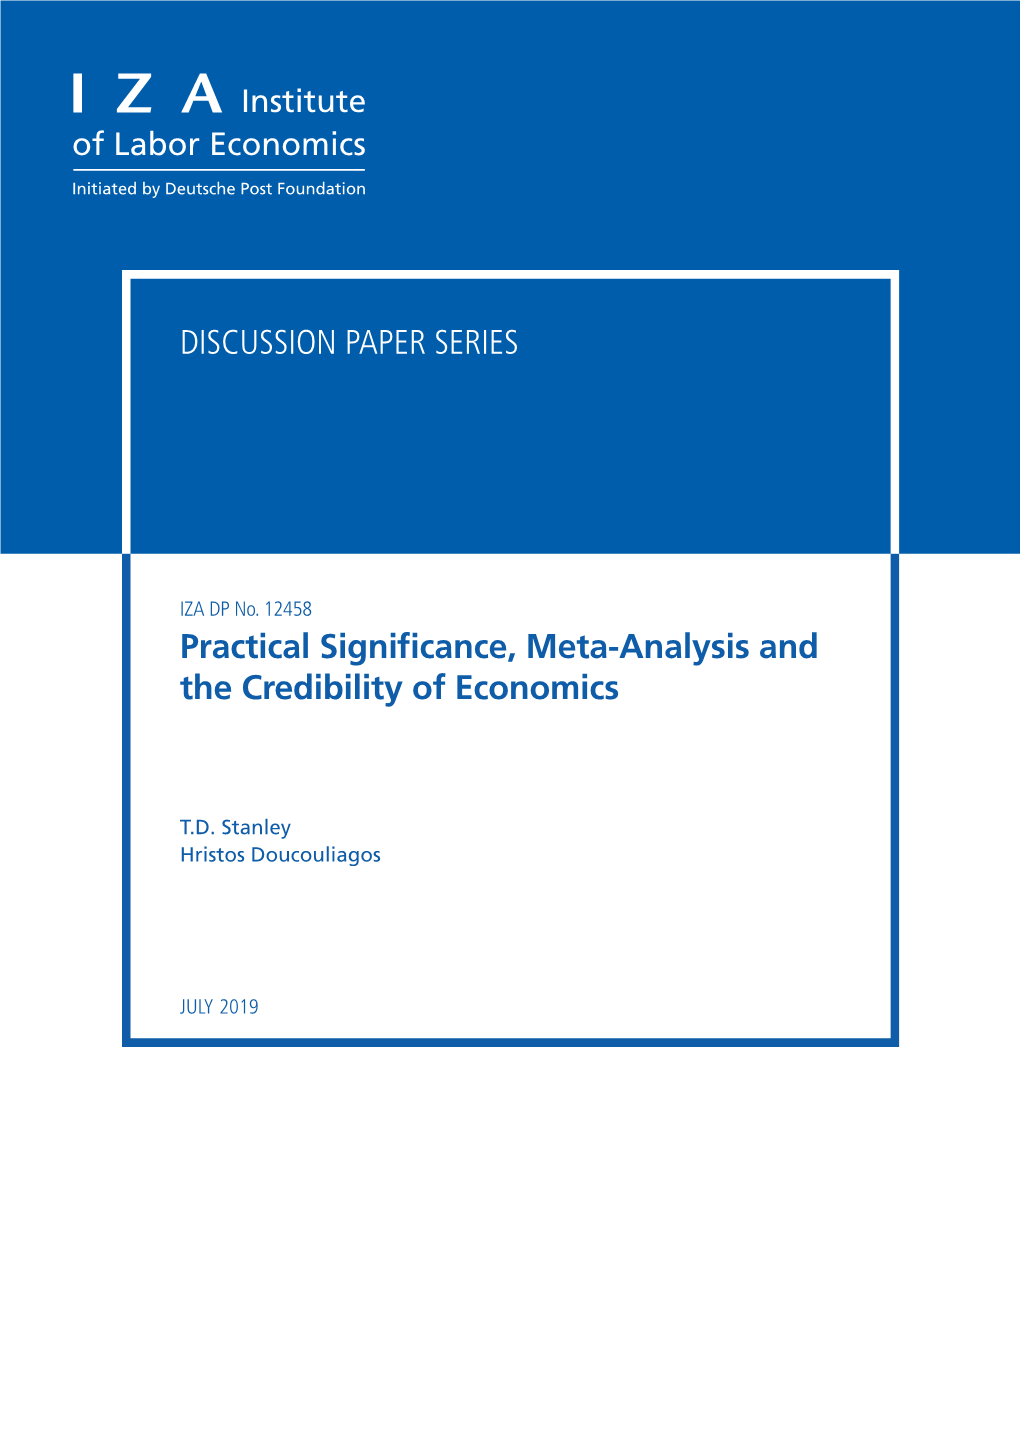 Practical Significance, Meta-Analysis and the Credibility of Economics